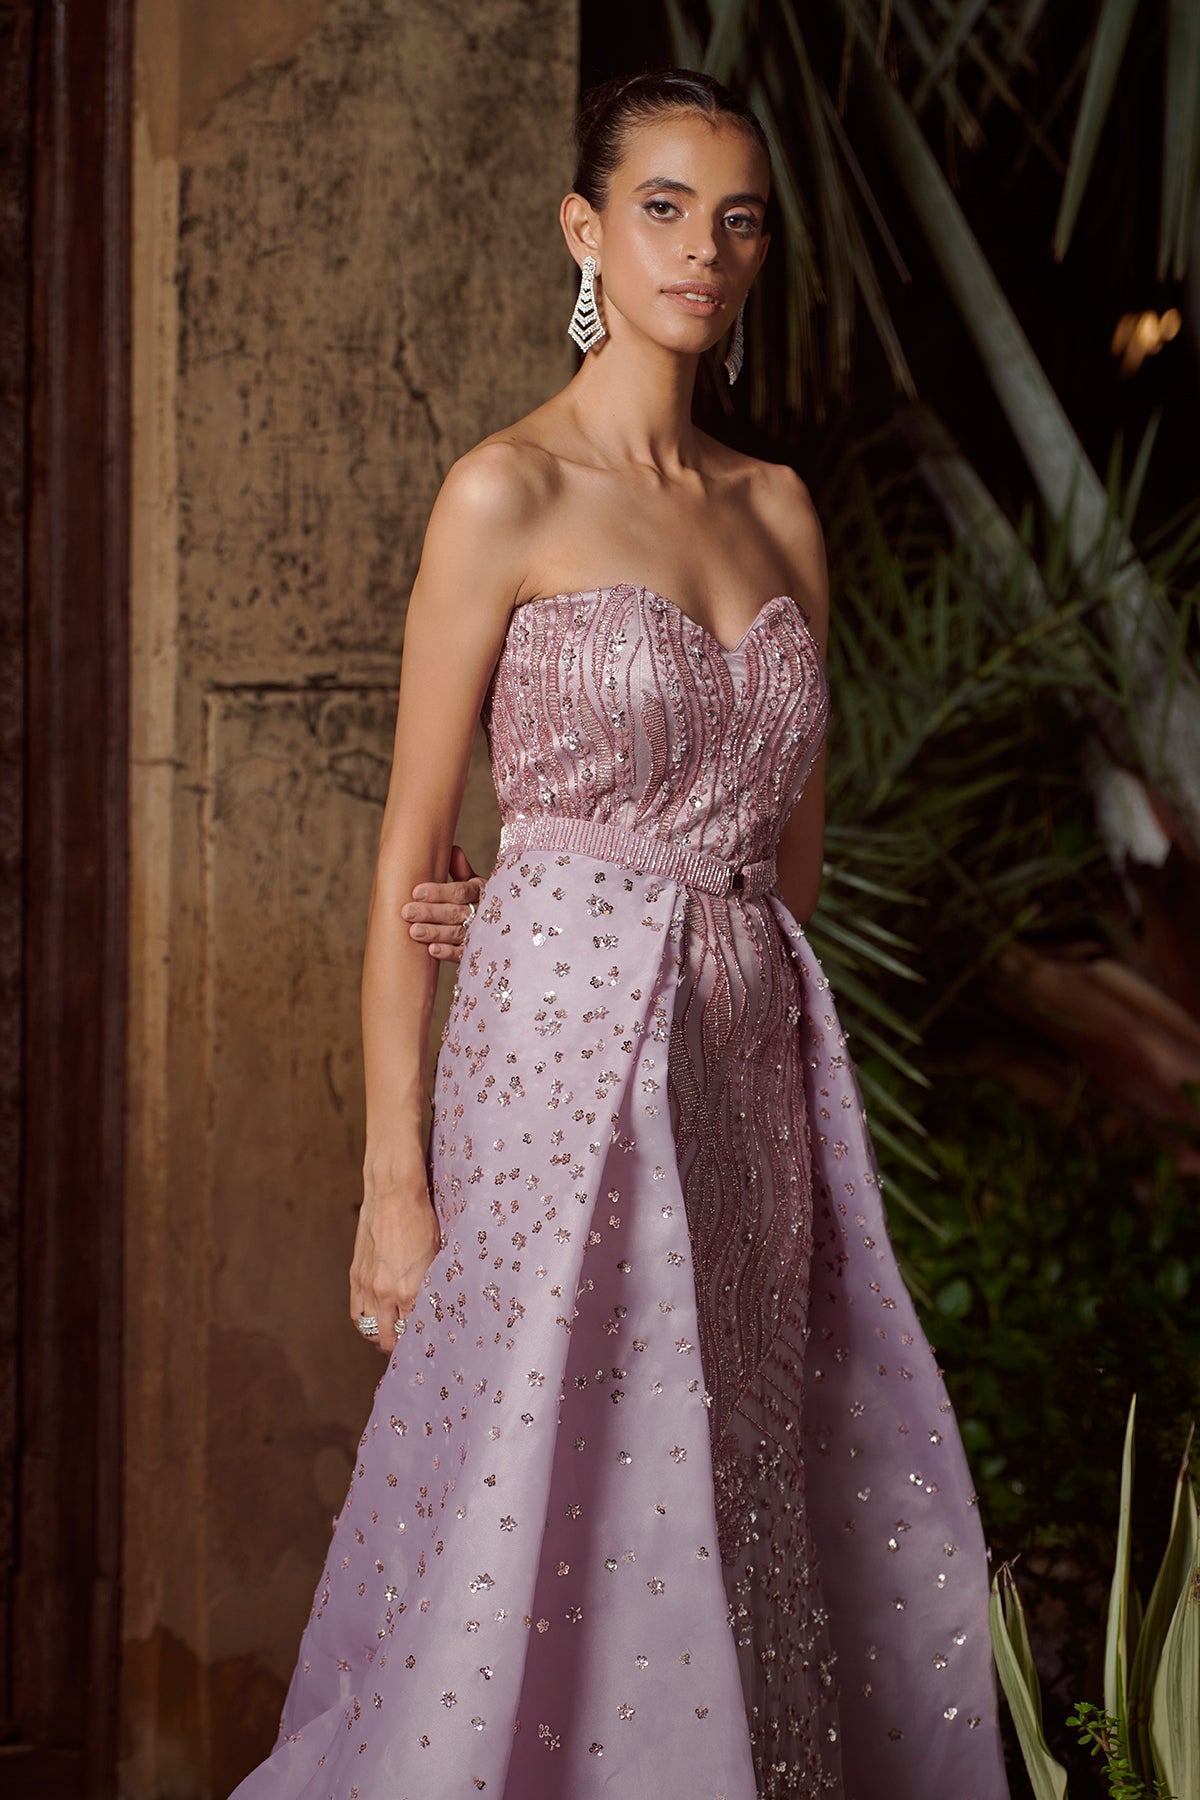 Buy Pink Organza Corset Gown For Women by Rachit Khanna Online at